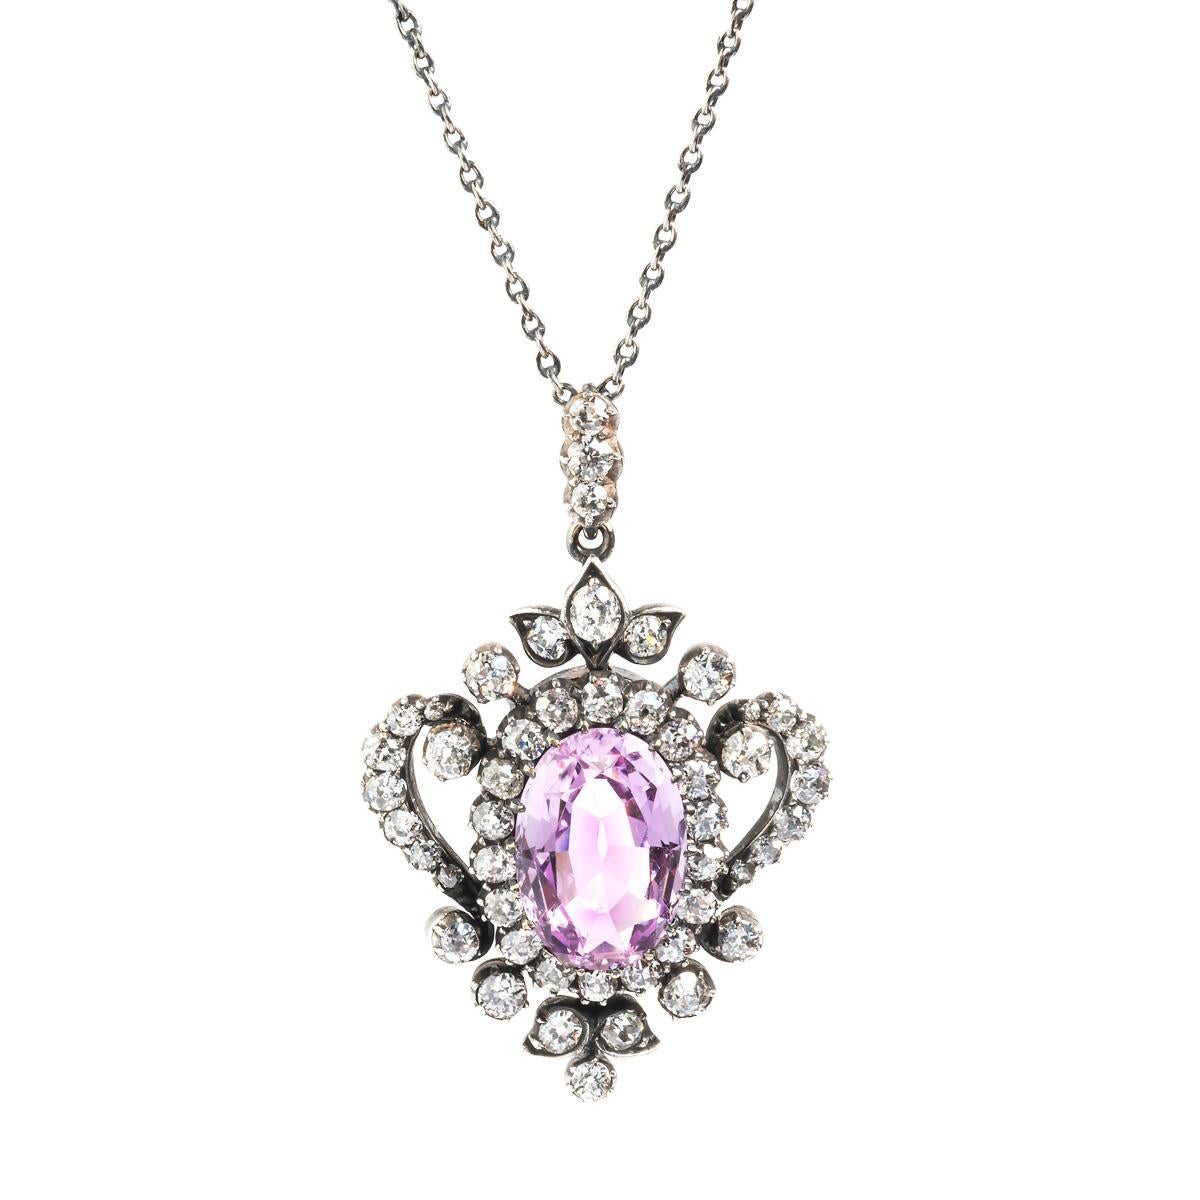 Georgian Oval Pink Topaz and Old Cut Diamond Pendant Set in Silver and Gold